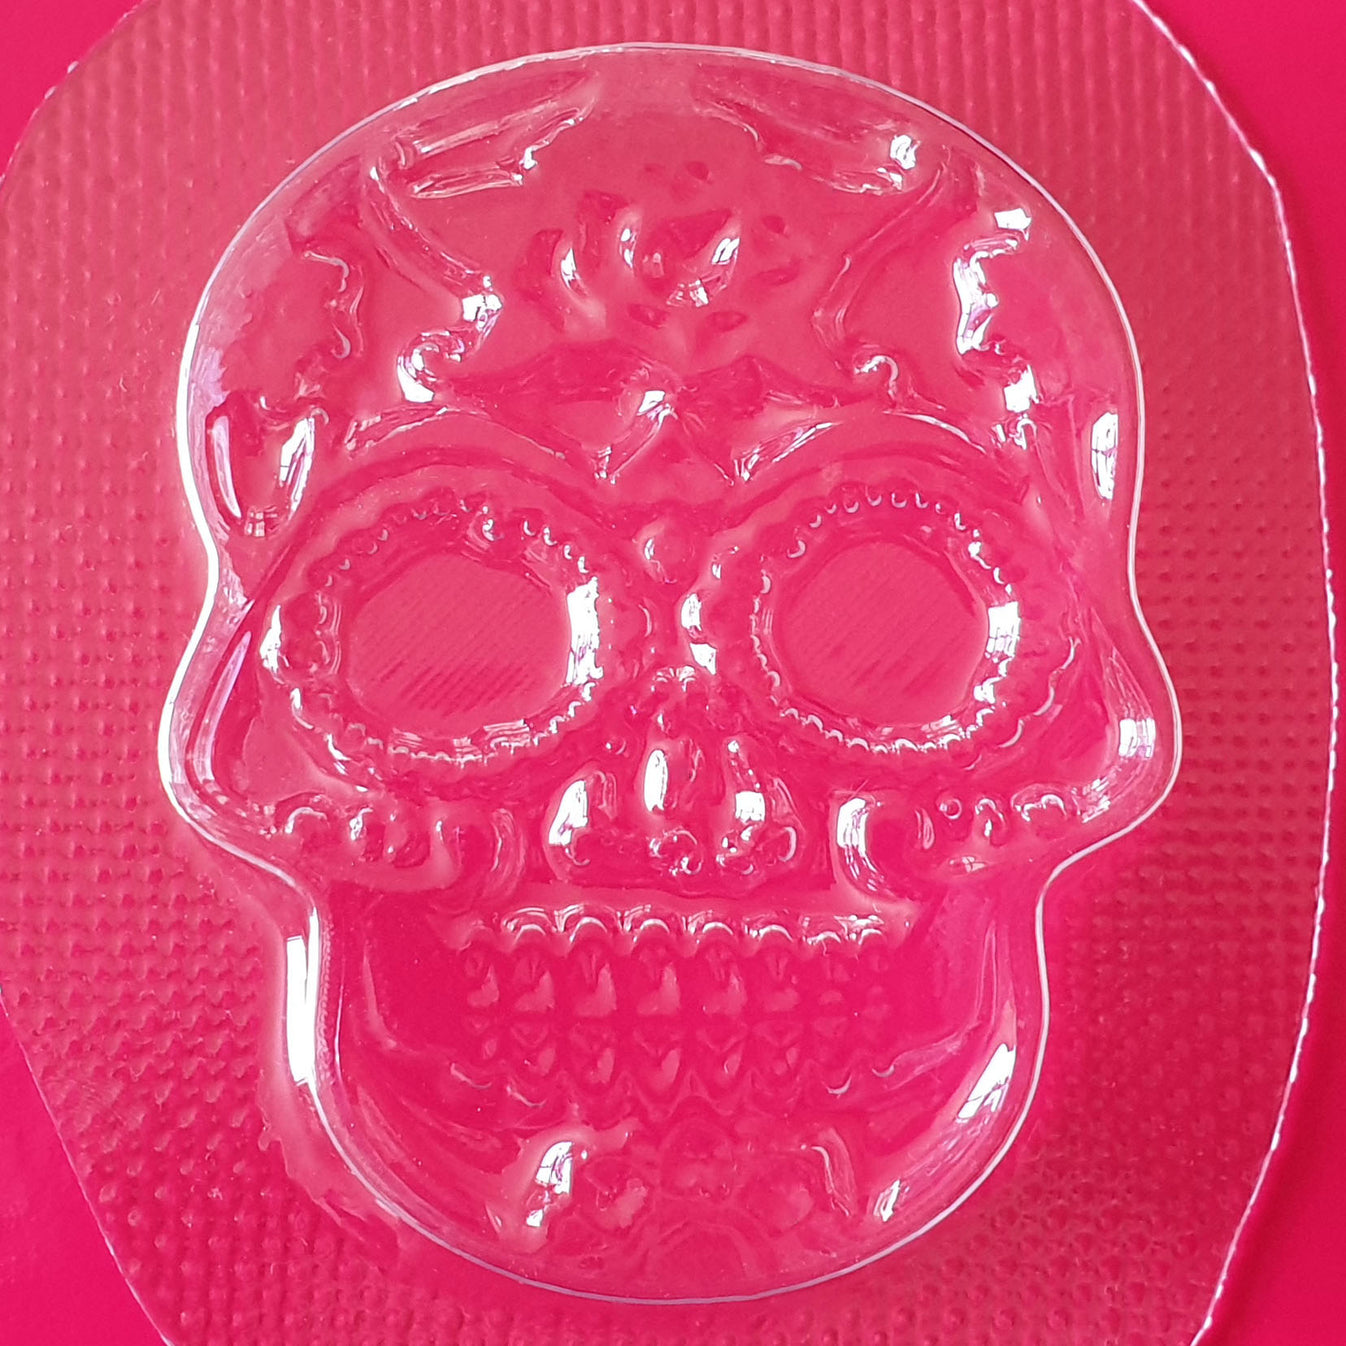 Candy Skull Bath Bomb Mould | Exclusive Designs | UK Trusted Supplier ...